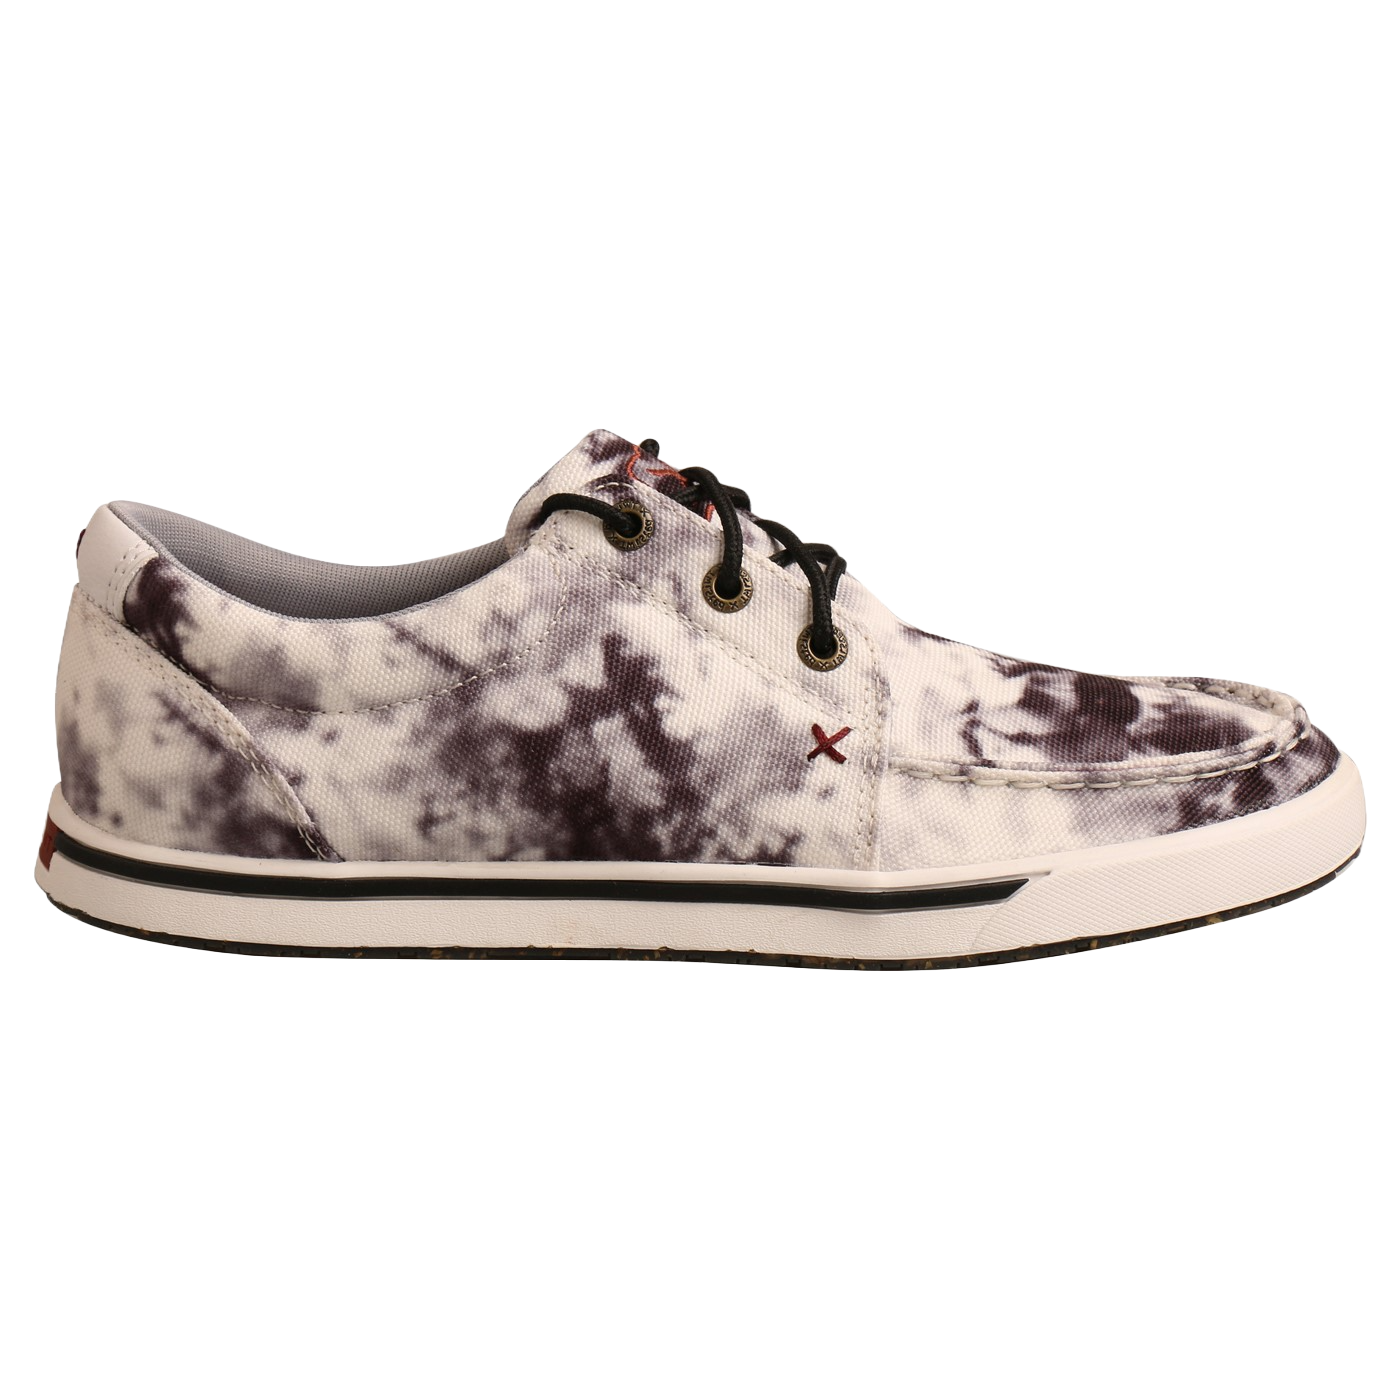 Twisted X Ladies Black And White Tie-Dye Lace Up Kick Shoes WCA0041